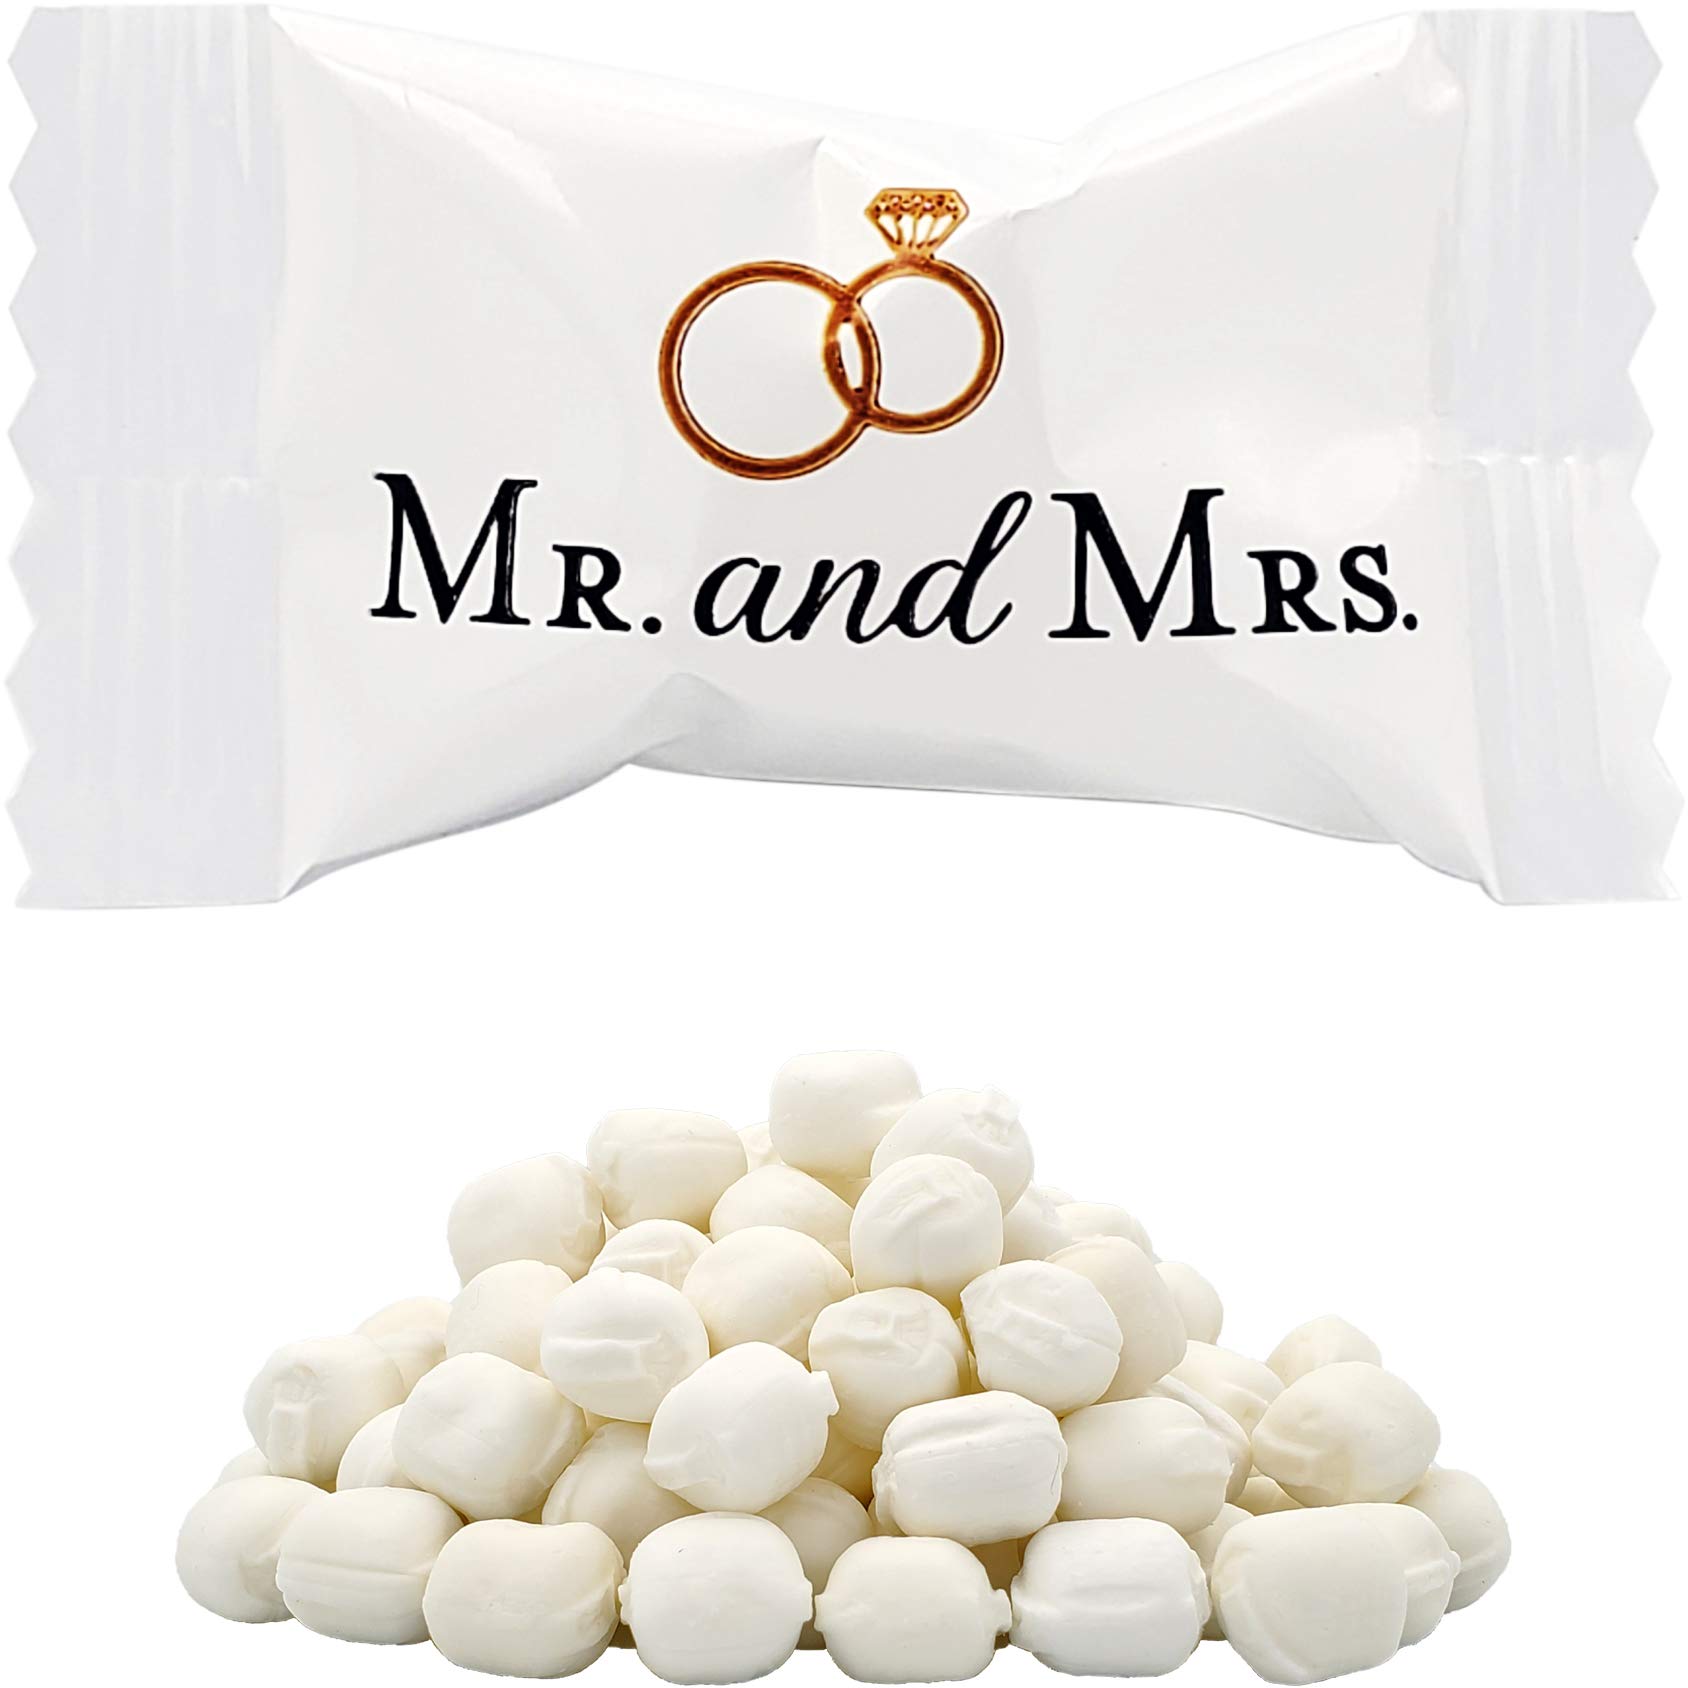 Bridal Shower Buttermints, Mint Candies, After Dinner Mints, Butter Mint  Candy, Fat-Free, Kosher Certified, Individually Wrapped (55 Pieces)